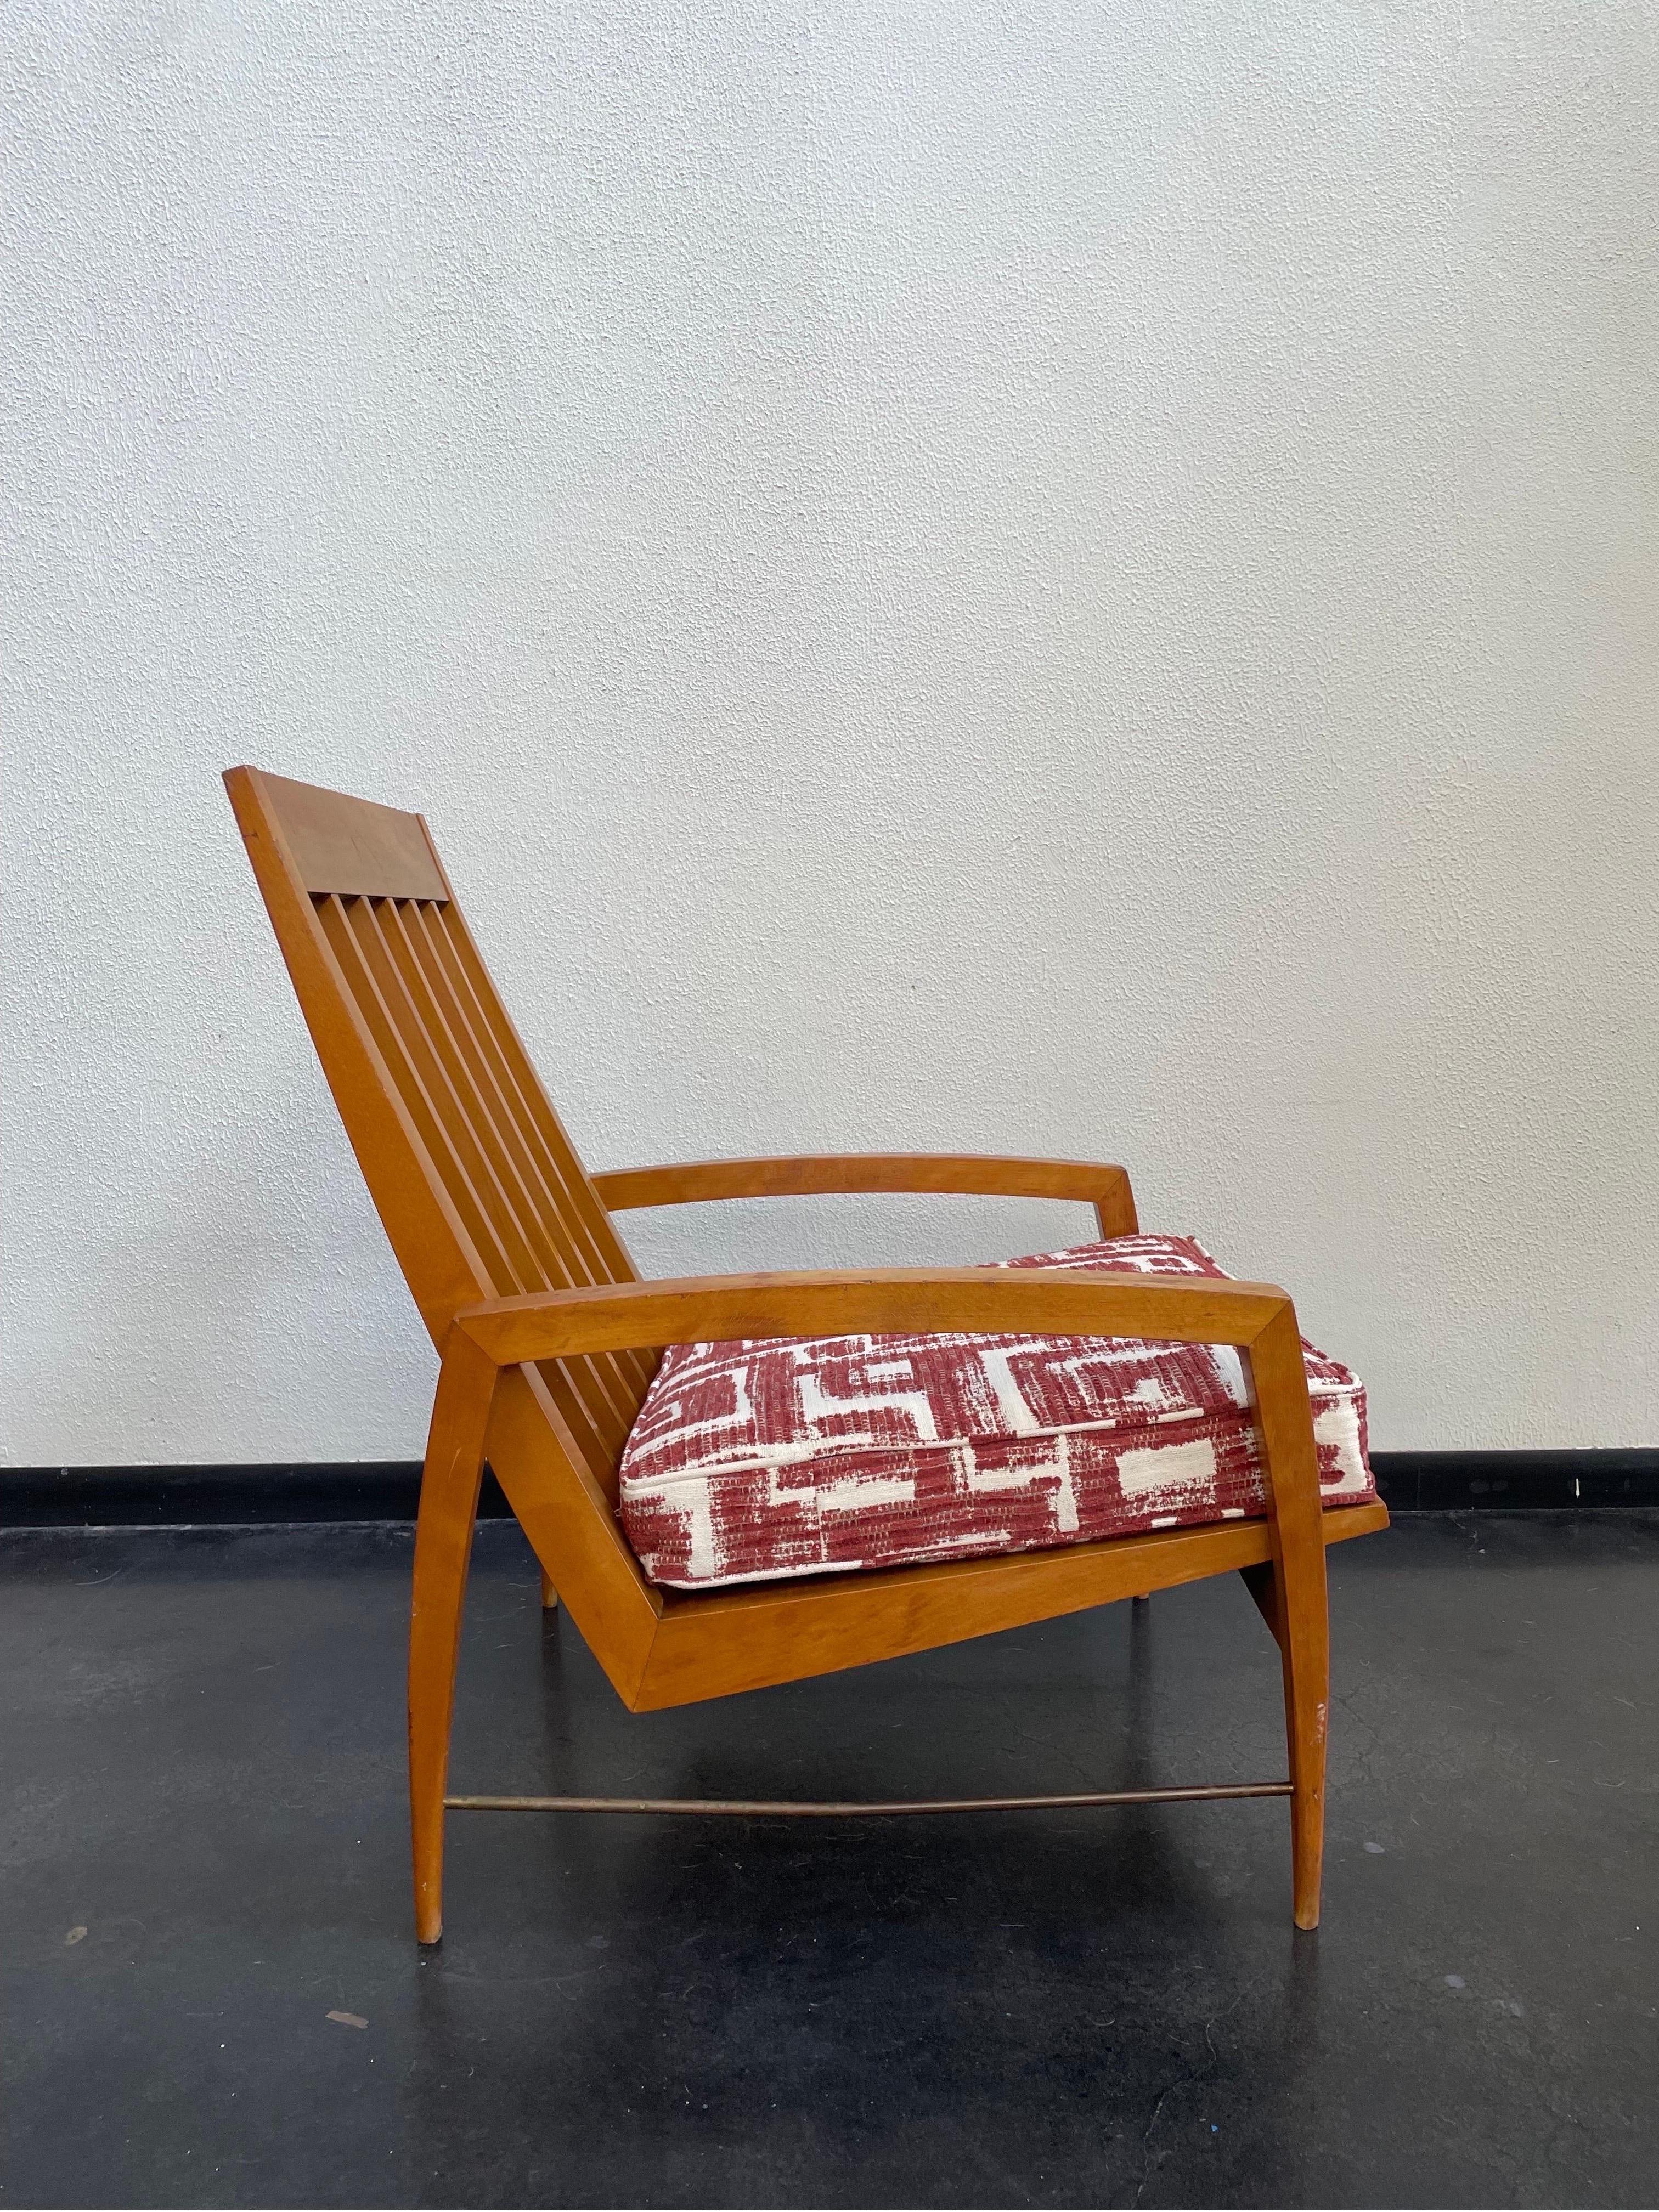 1960’s Danish modern high-back lounge chair featuring a beautifully carved walnut wood frame with 5 slats accentuating the back. With a new upholstered cushion.